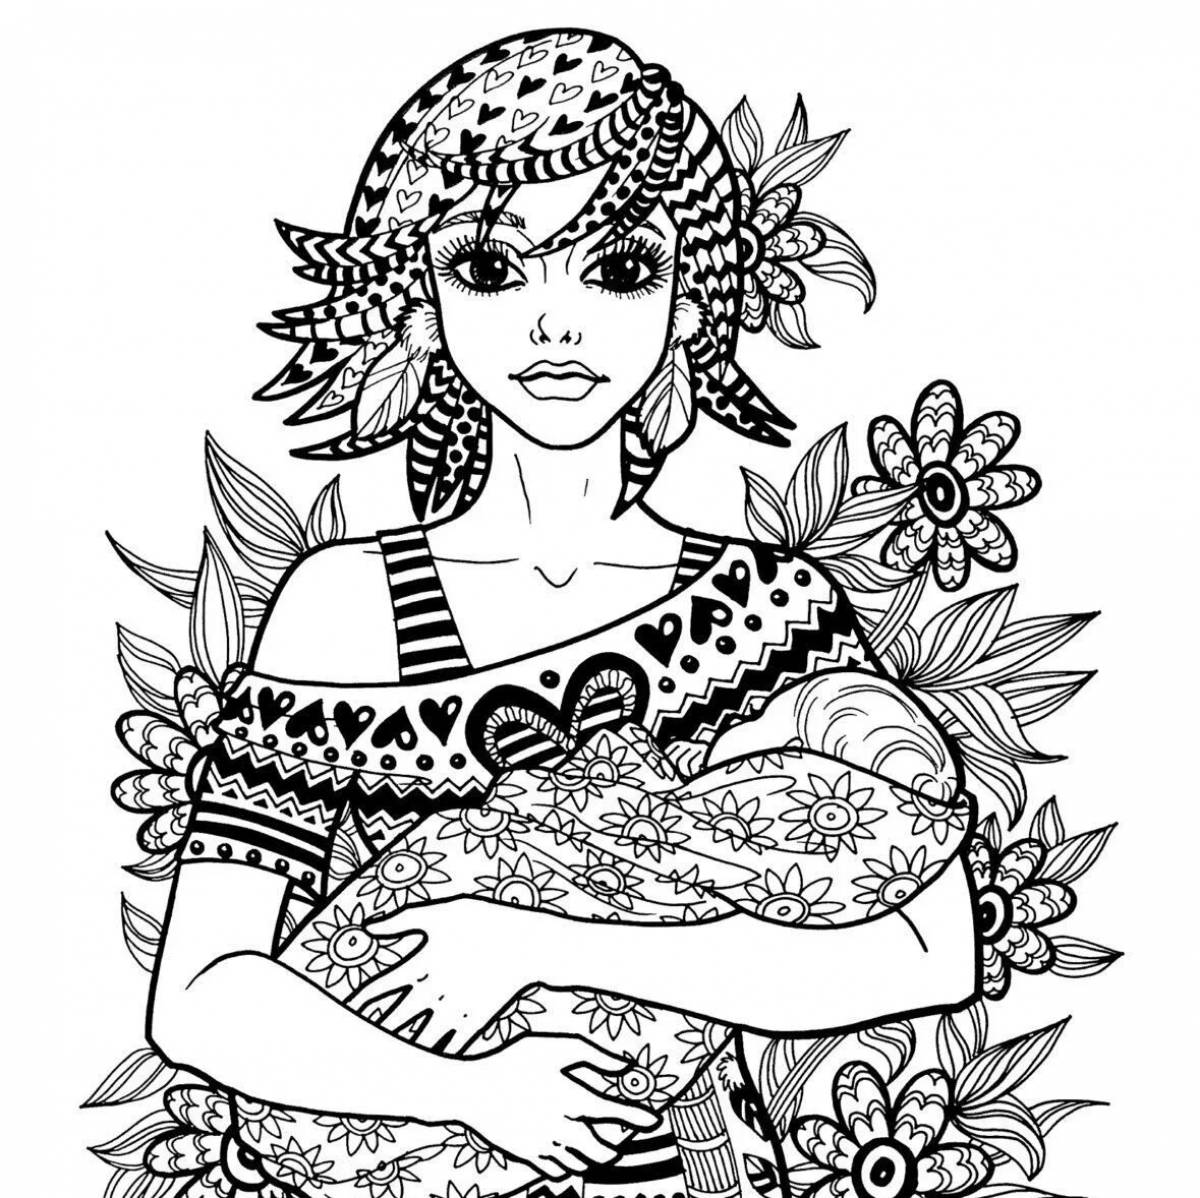 Rave pregnancy coloring page